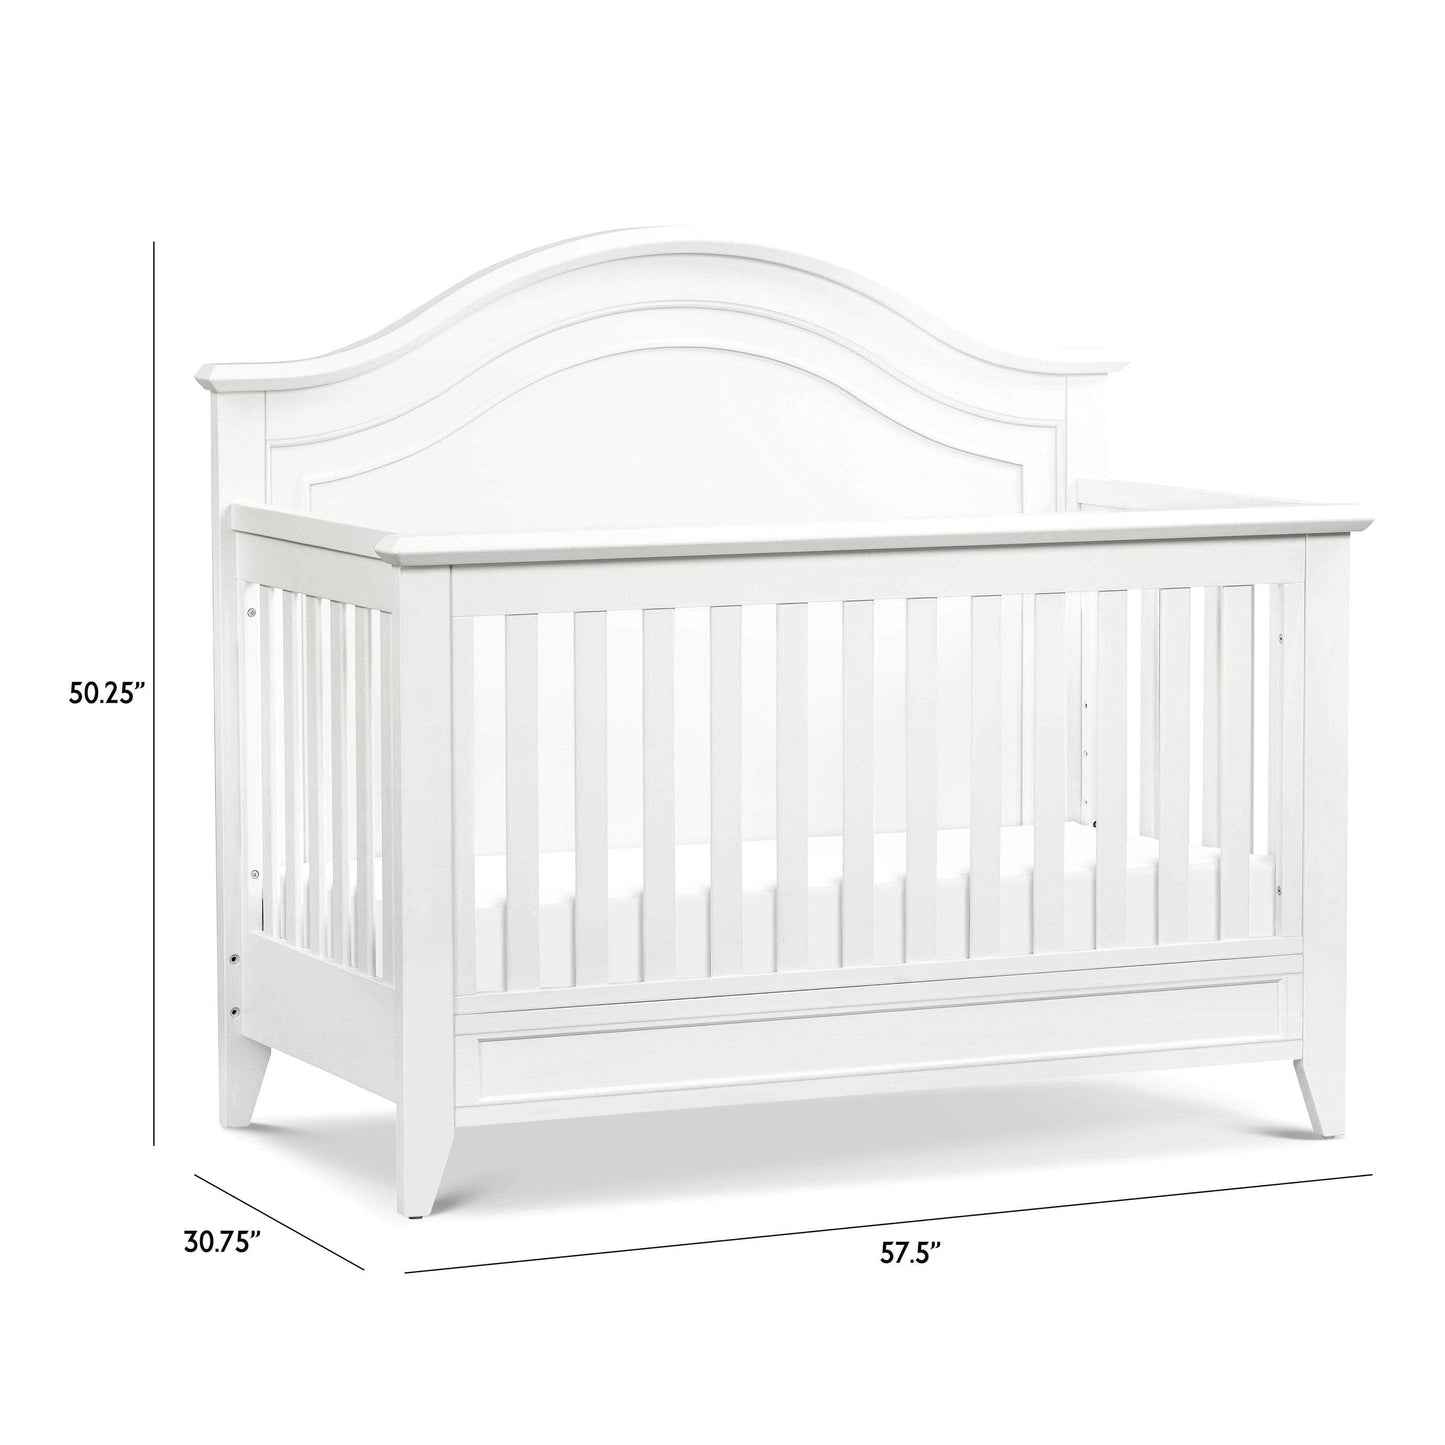 M34401RW,Beckett Rustic 4-in-1 Convertible Curve Top Crib in Warm White